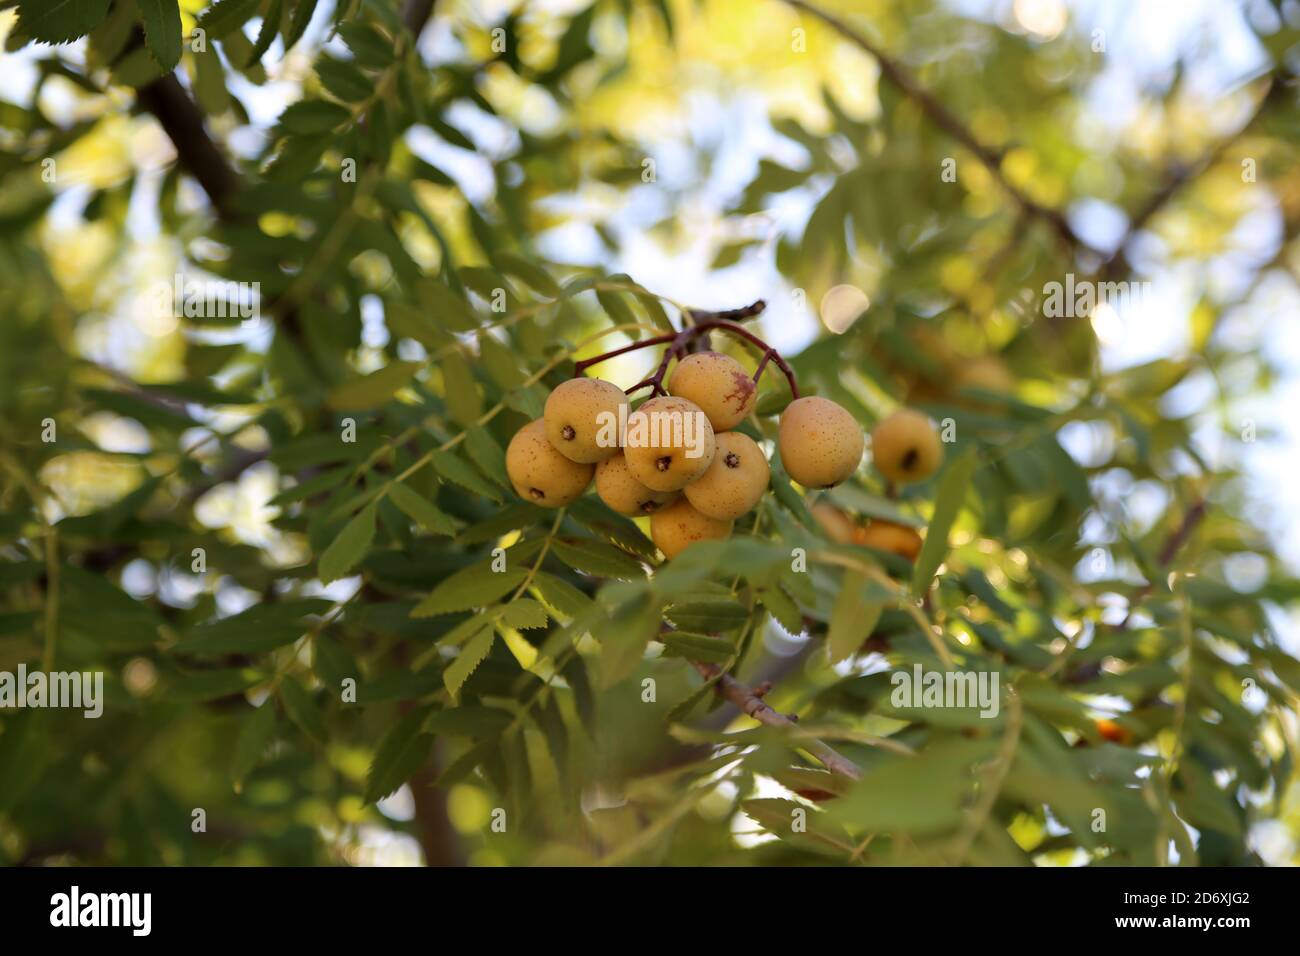 Closeup shot of a sorbus domestica tree with ripen fruit on the branches Stock Photo